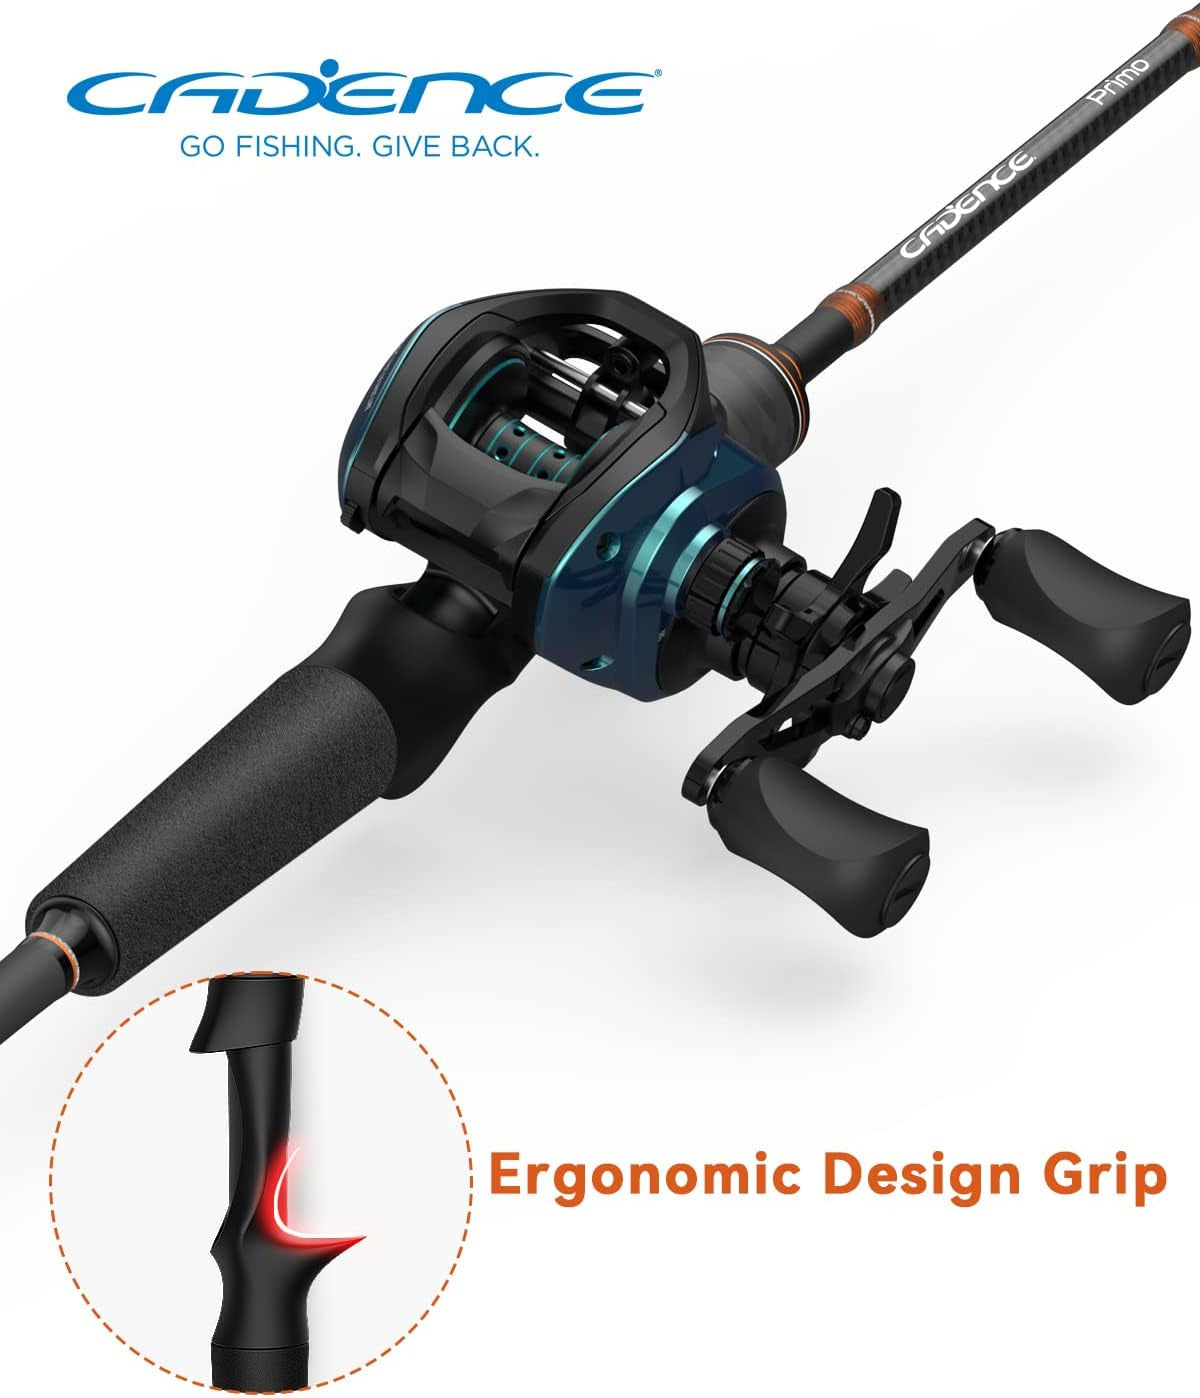 Cadence Primo Baitcasting Rod - Strong & Sensitive Fishing Rod, 40 Ton Carbon Fiber Ultralight Casting Rod with Fuji Reel Seat, Stainless Steel Guides with Sic Inserts, Freshwater Bass Fishing Pole